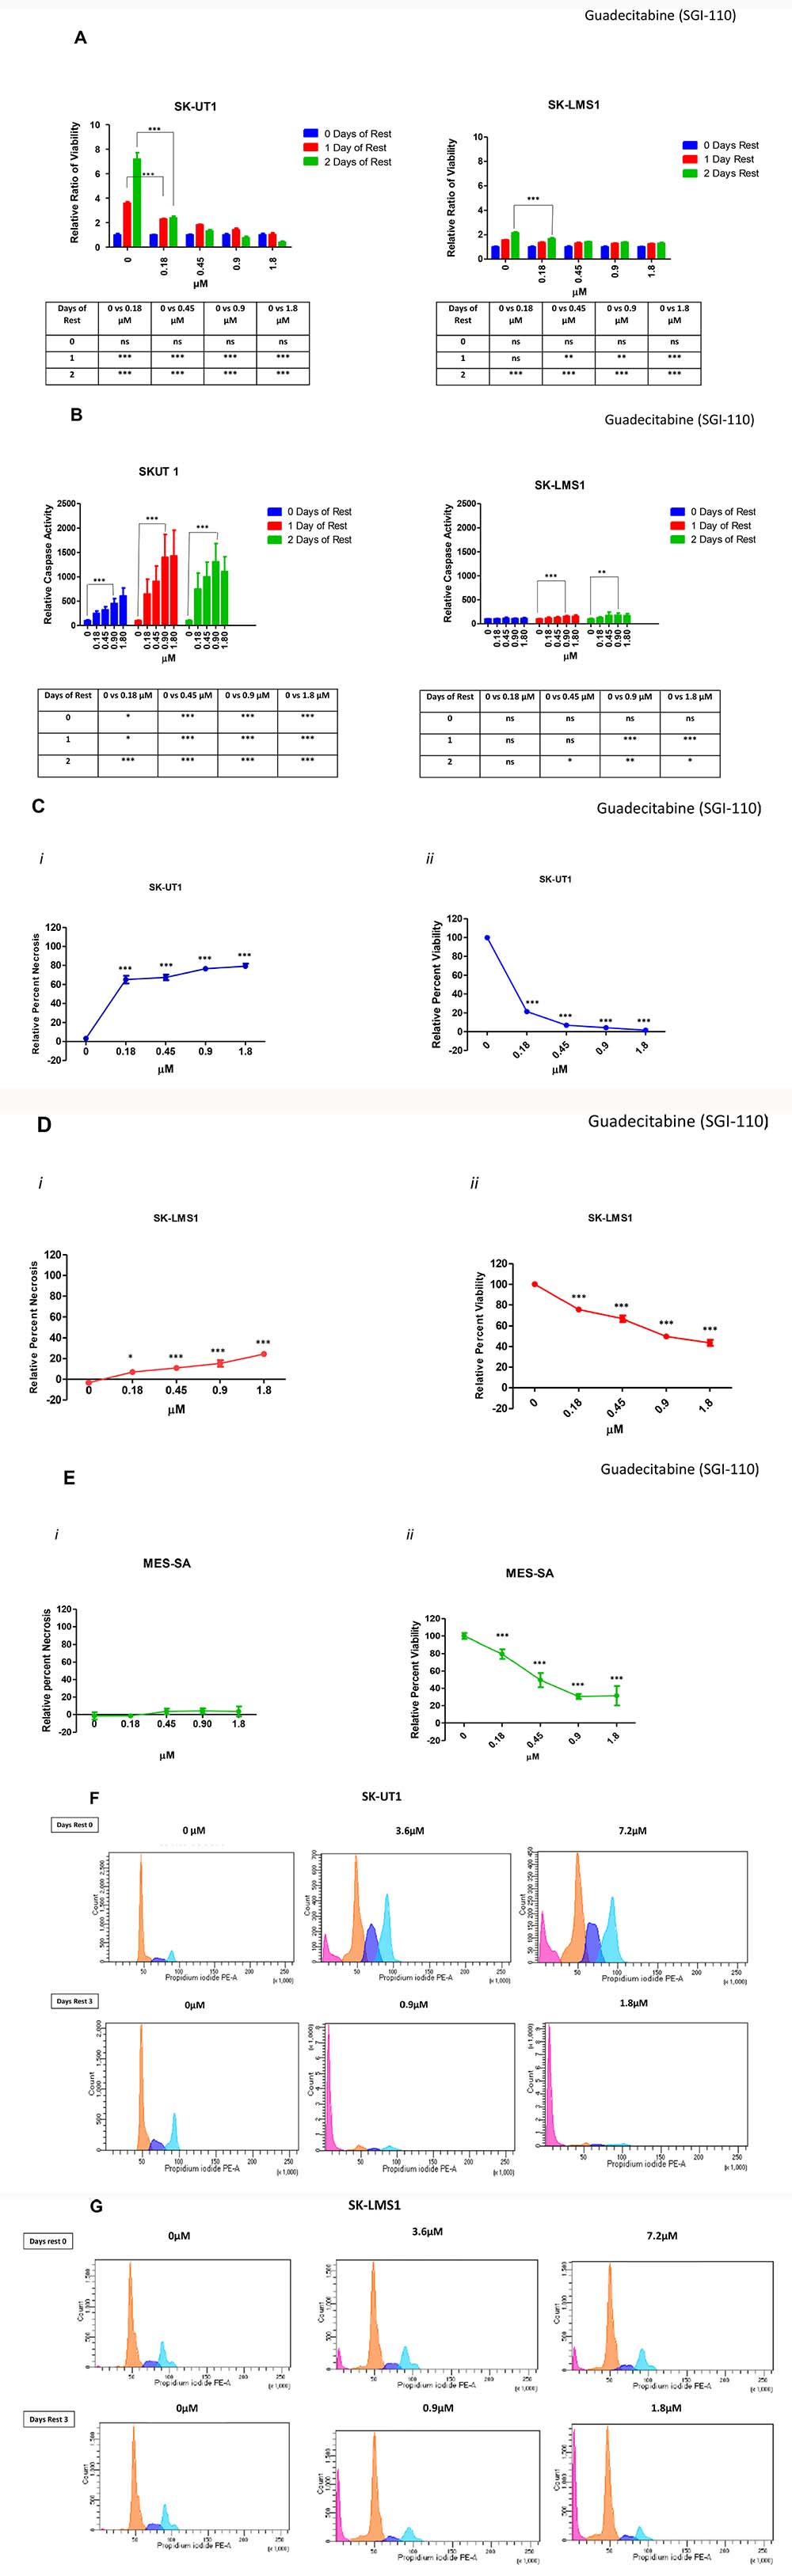 Guadecitabine has a delayed effect on sensitive LMS cell lines.